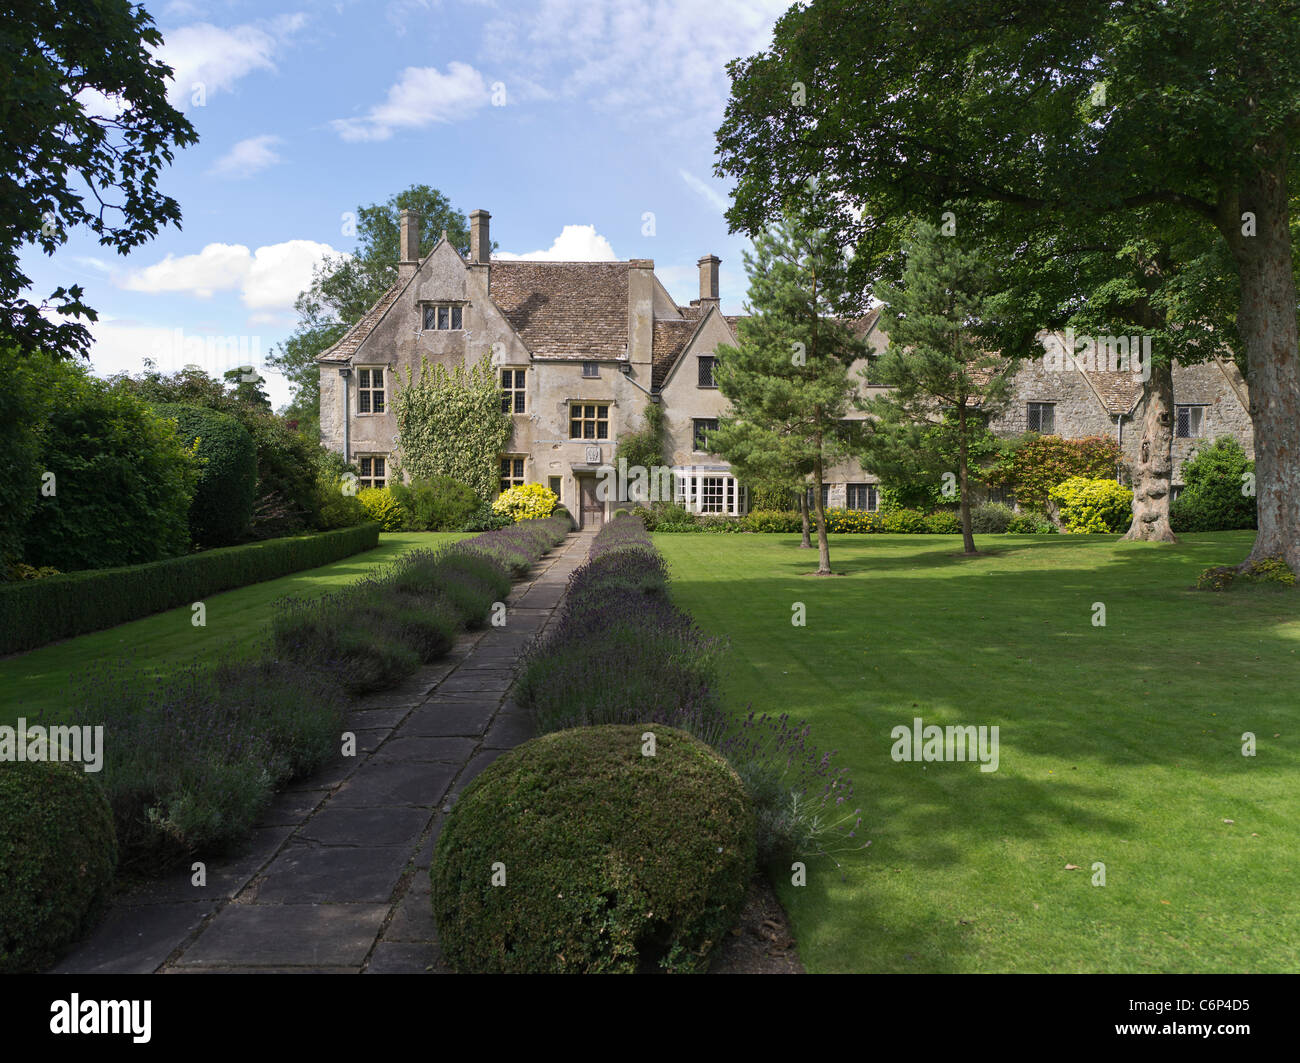 dh Avebury Manor AVEBURY WILTSHIRE National Trust Avebury Manor Garden and House site royaume-uni Banque D'Images